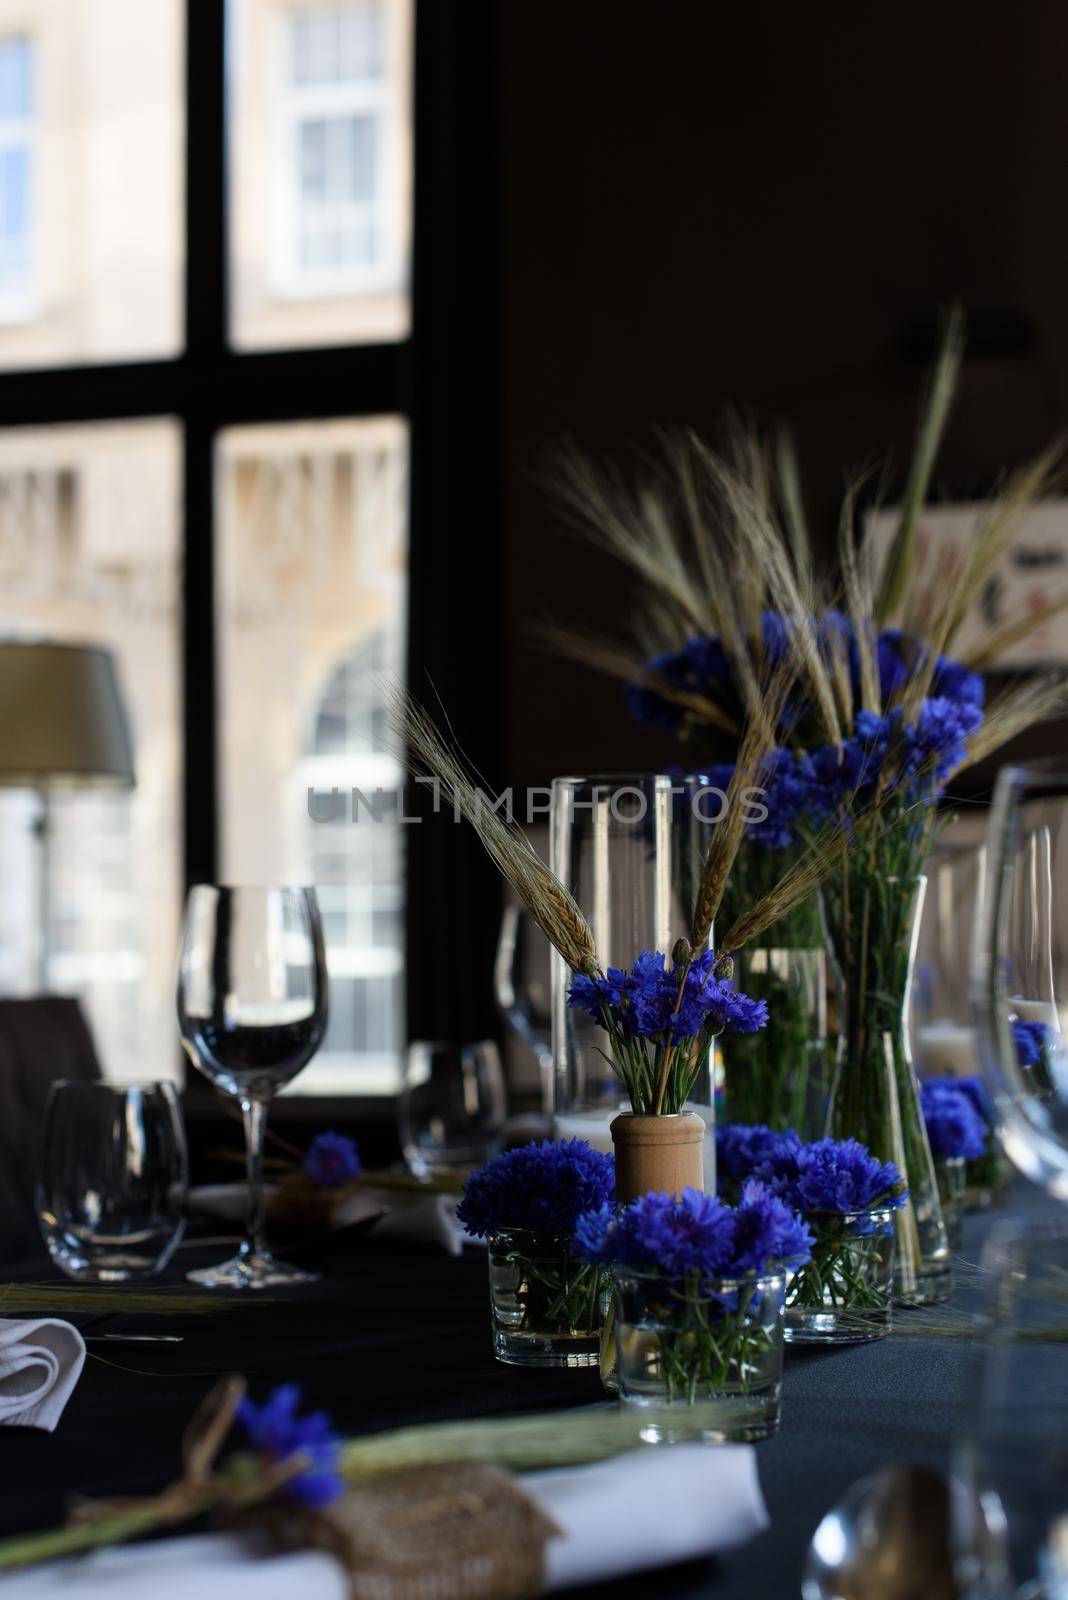 A set of furniture in a cafe. Vase with flowers decor for the restaurant.